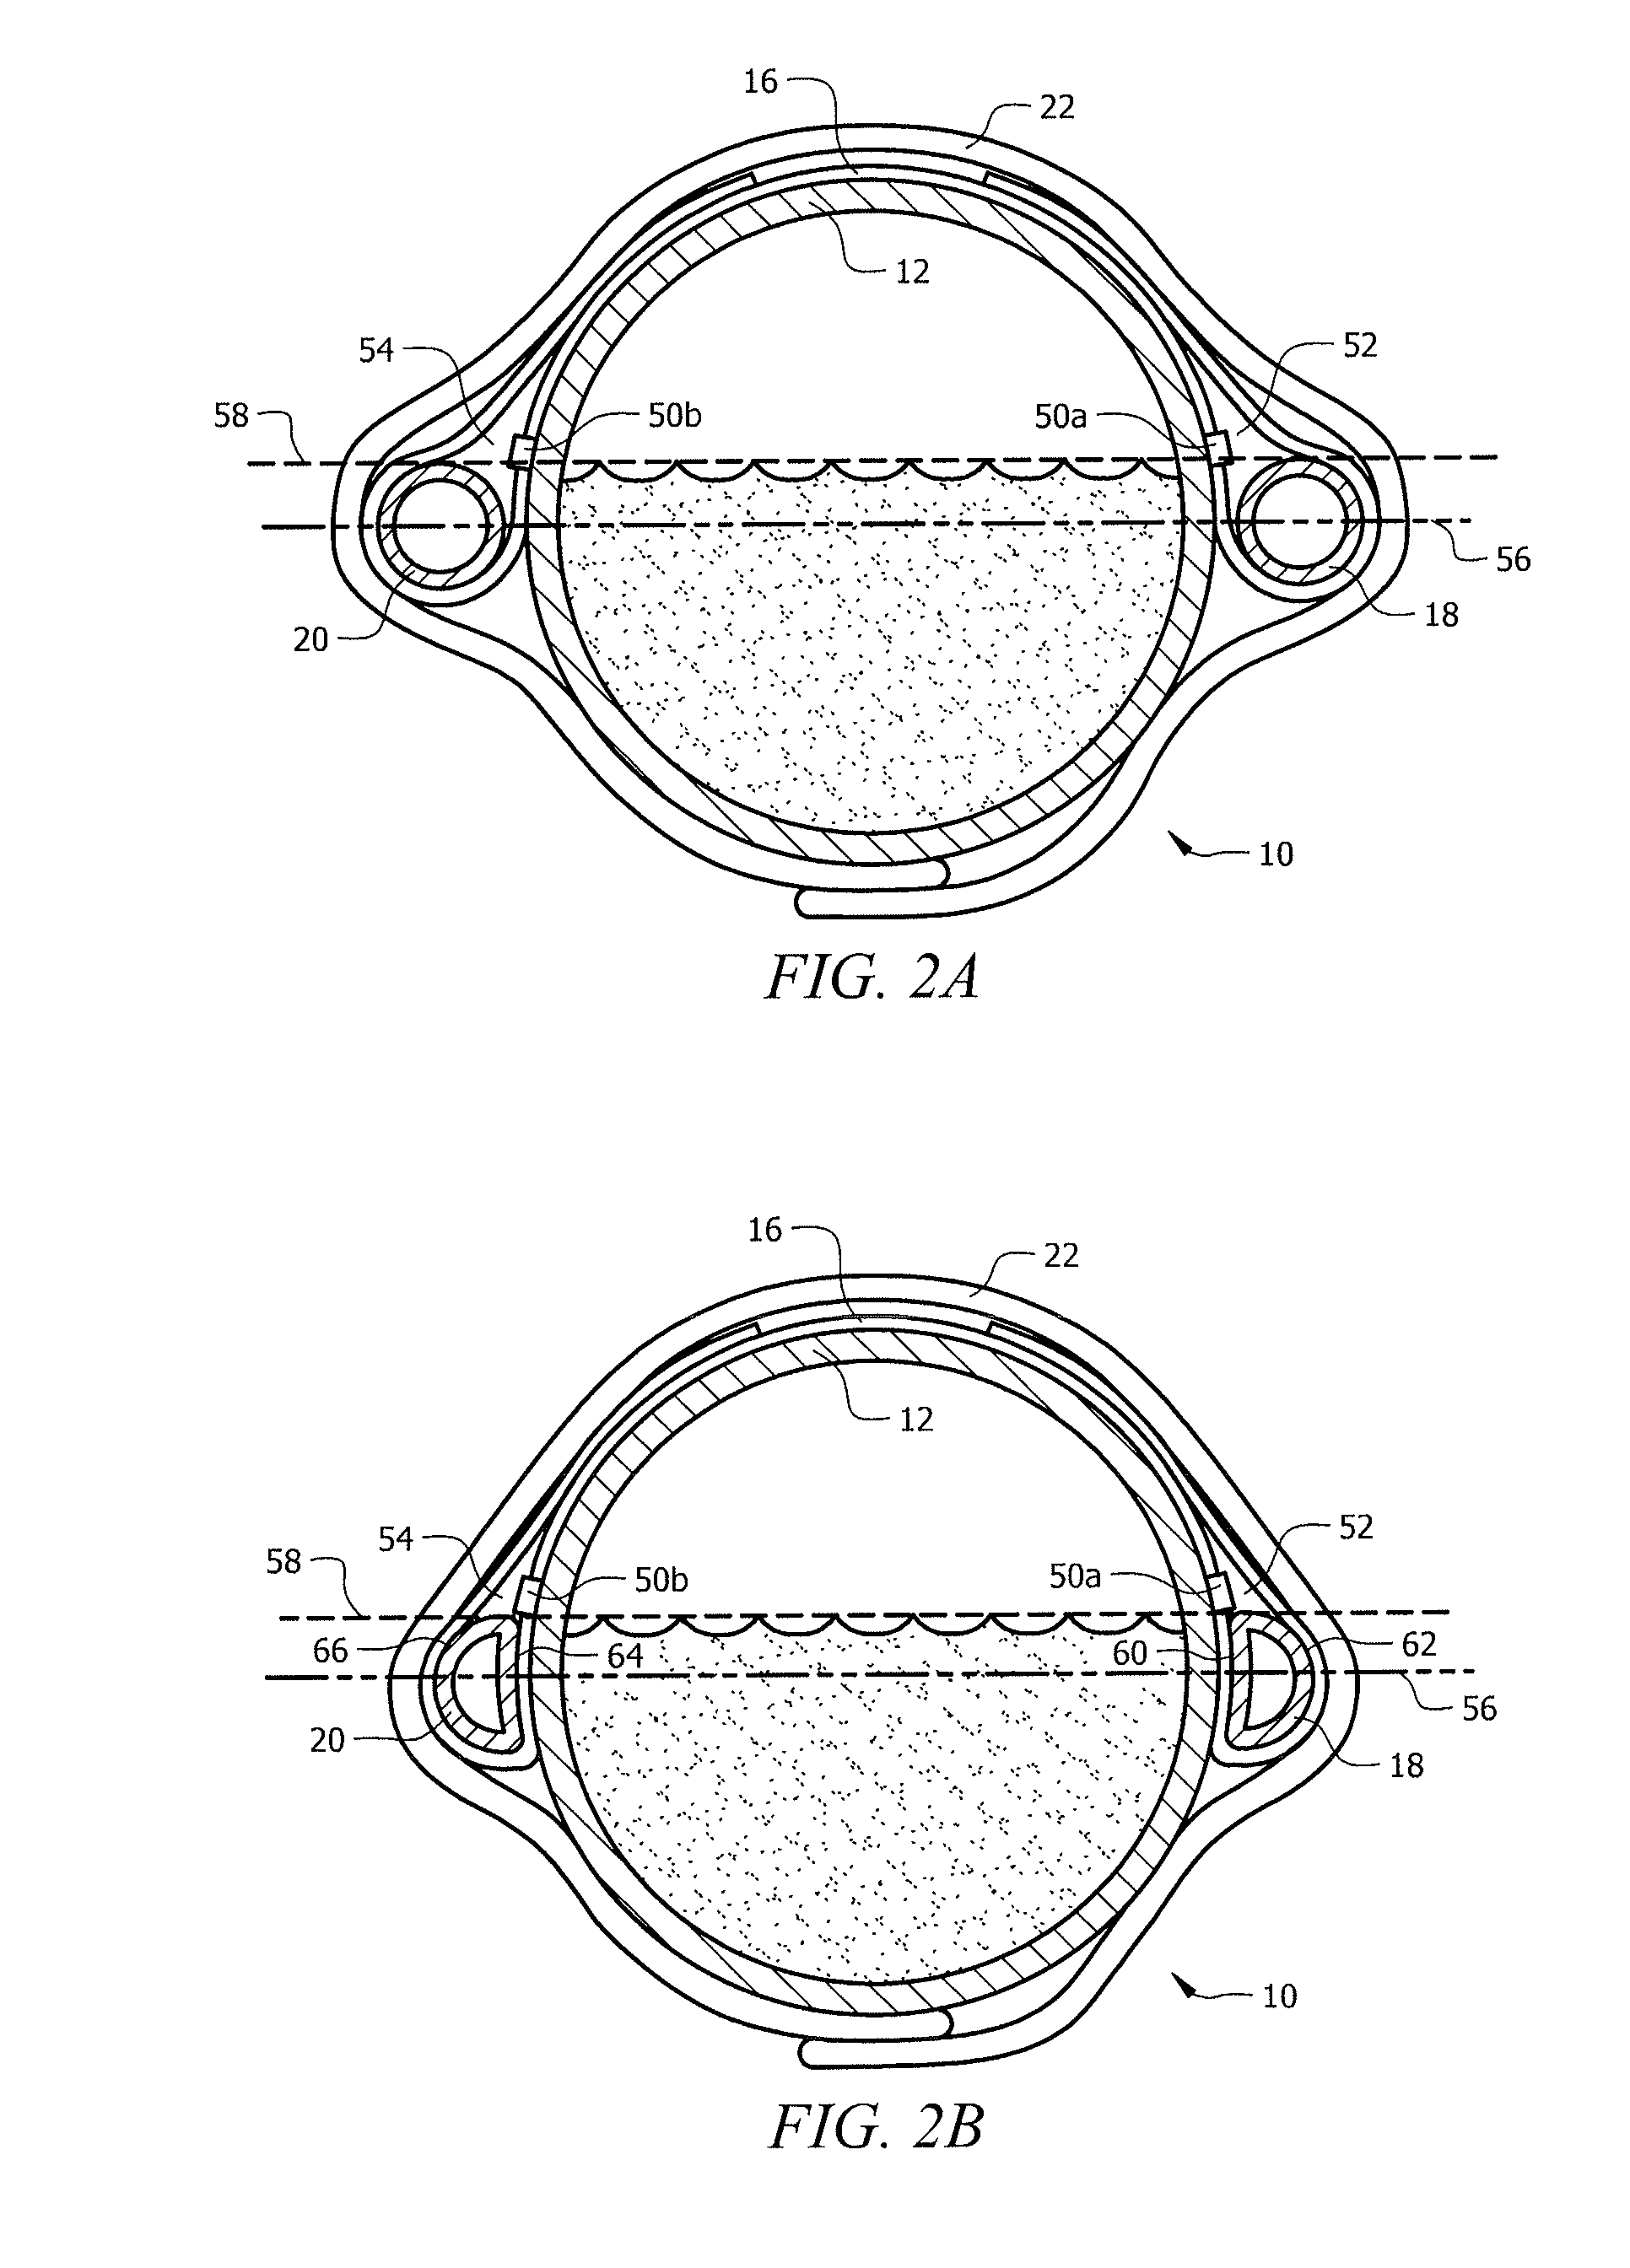 System and method for heating a pipeline using heated lines